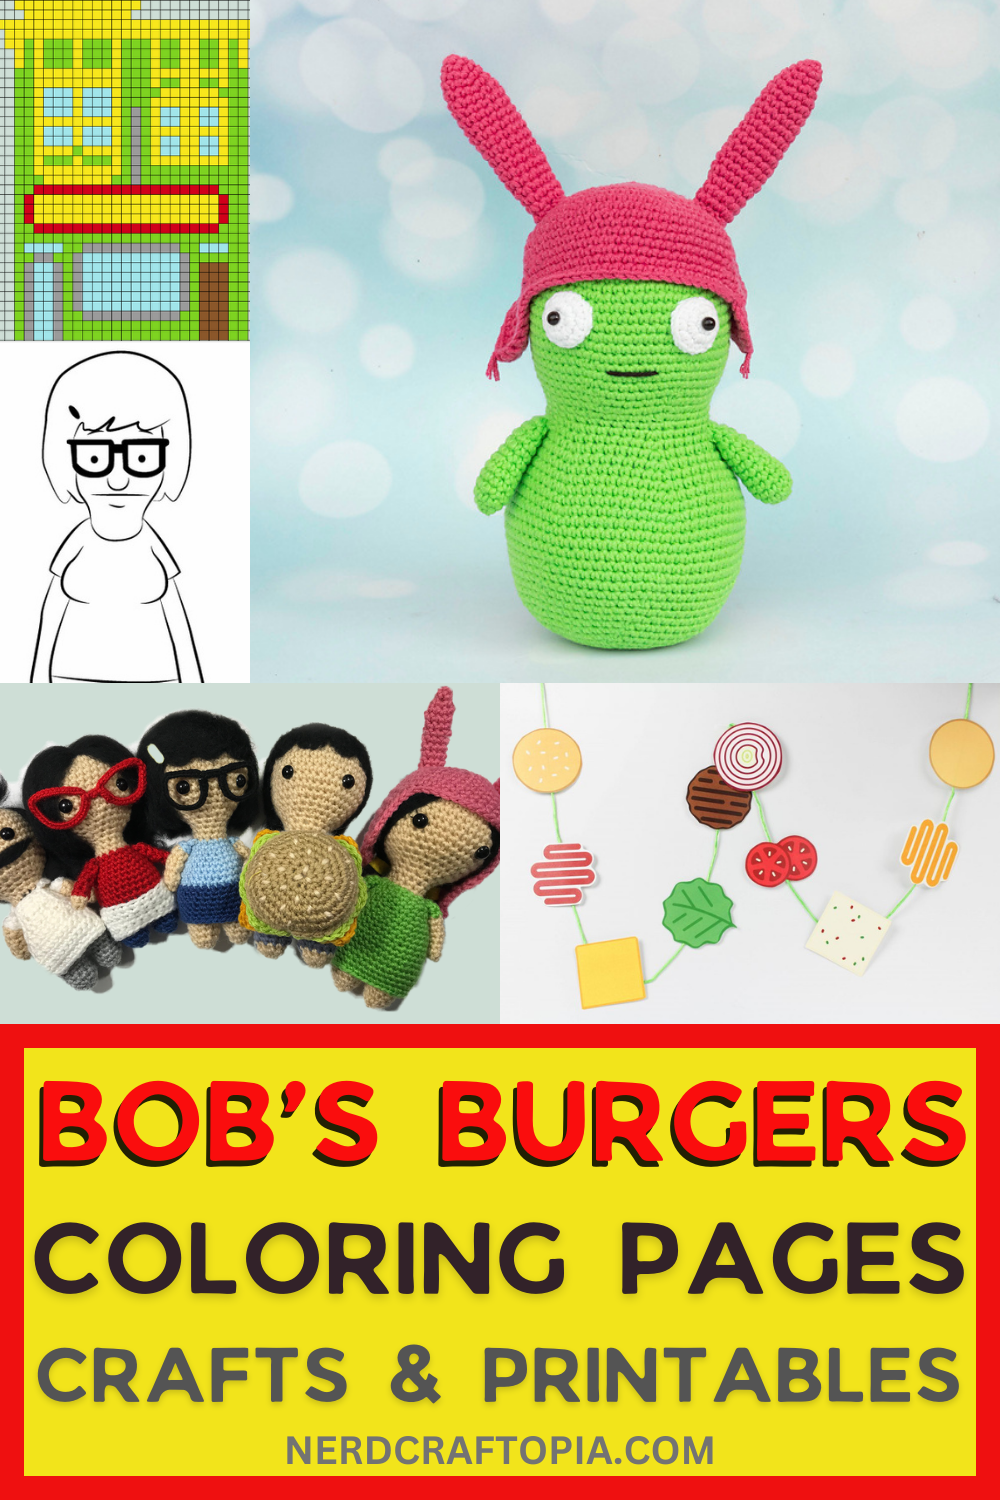 bob's burgers coloring pages crafts and printables